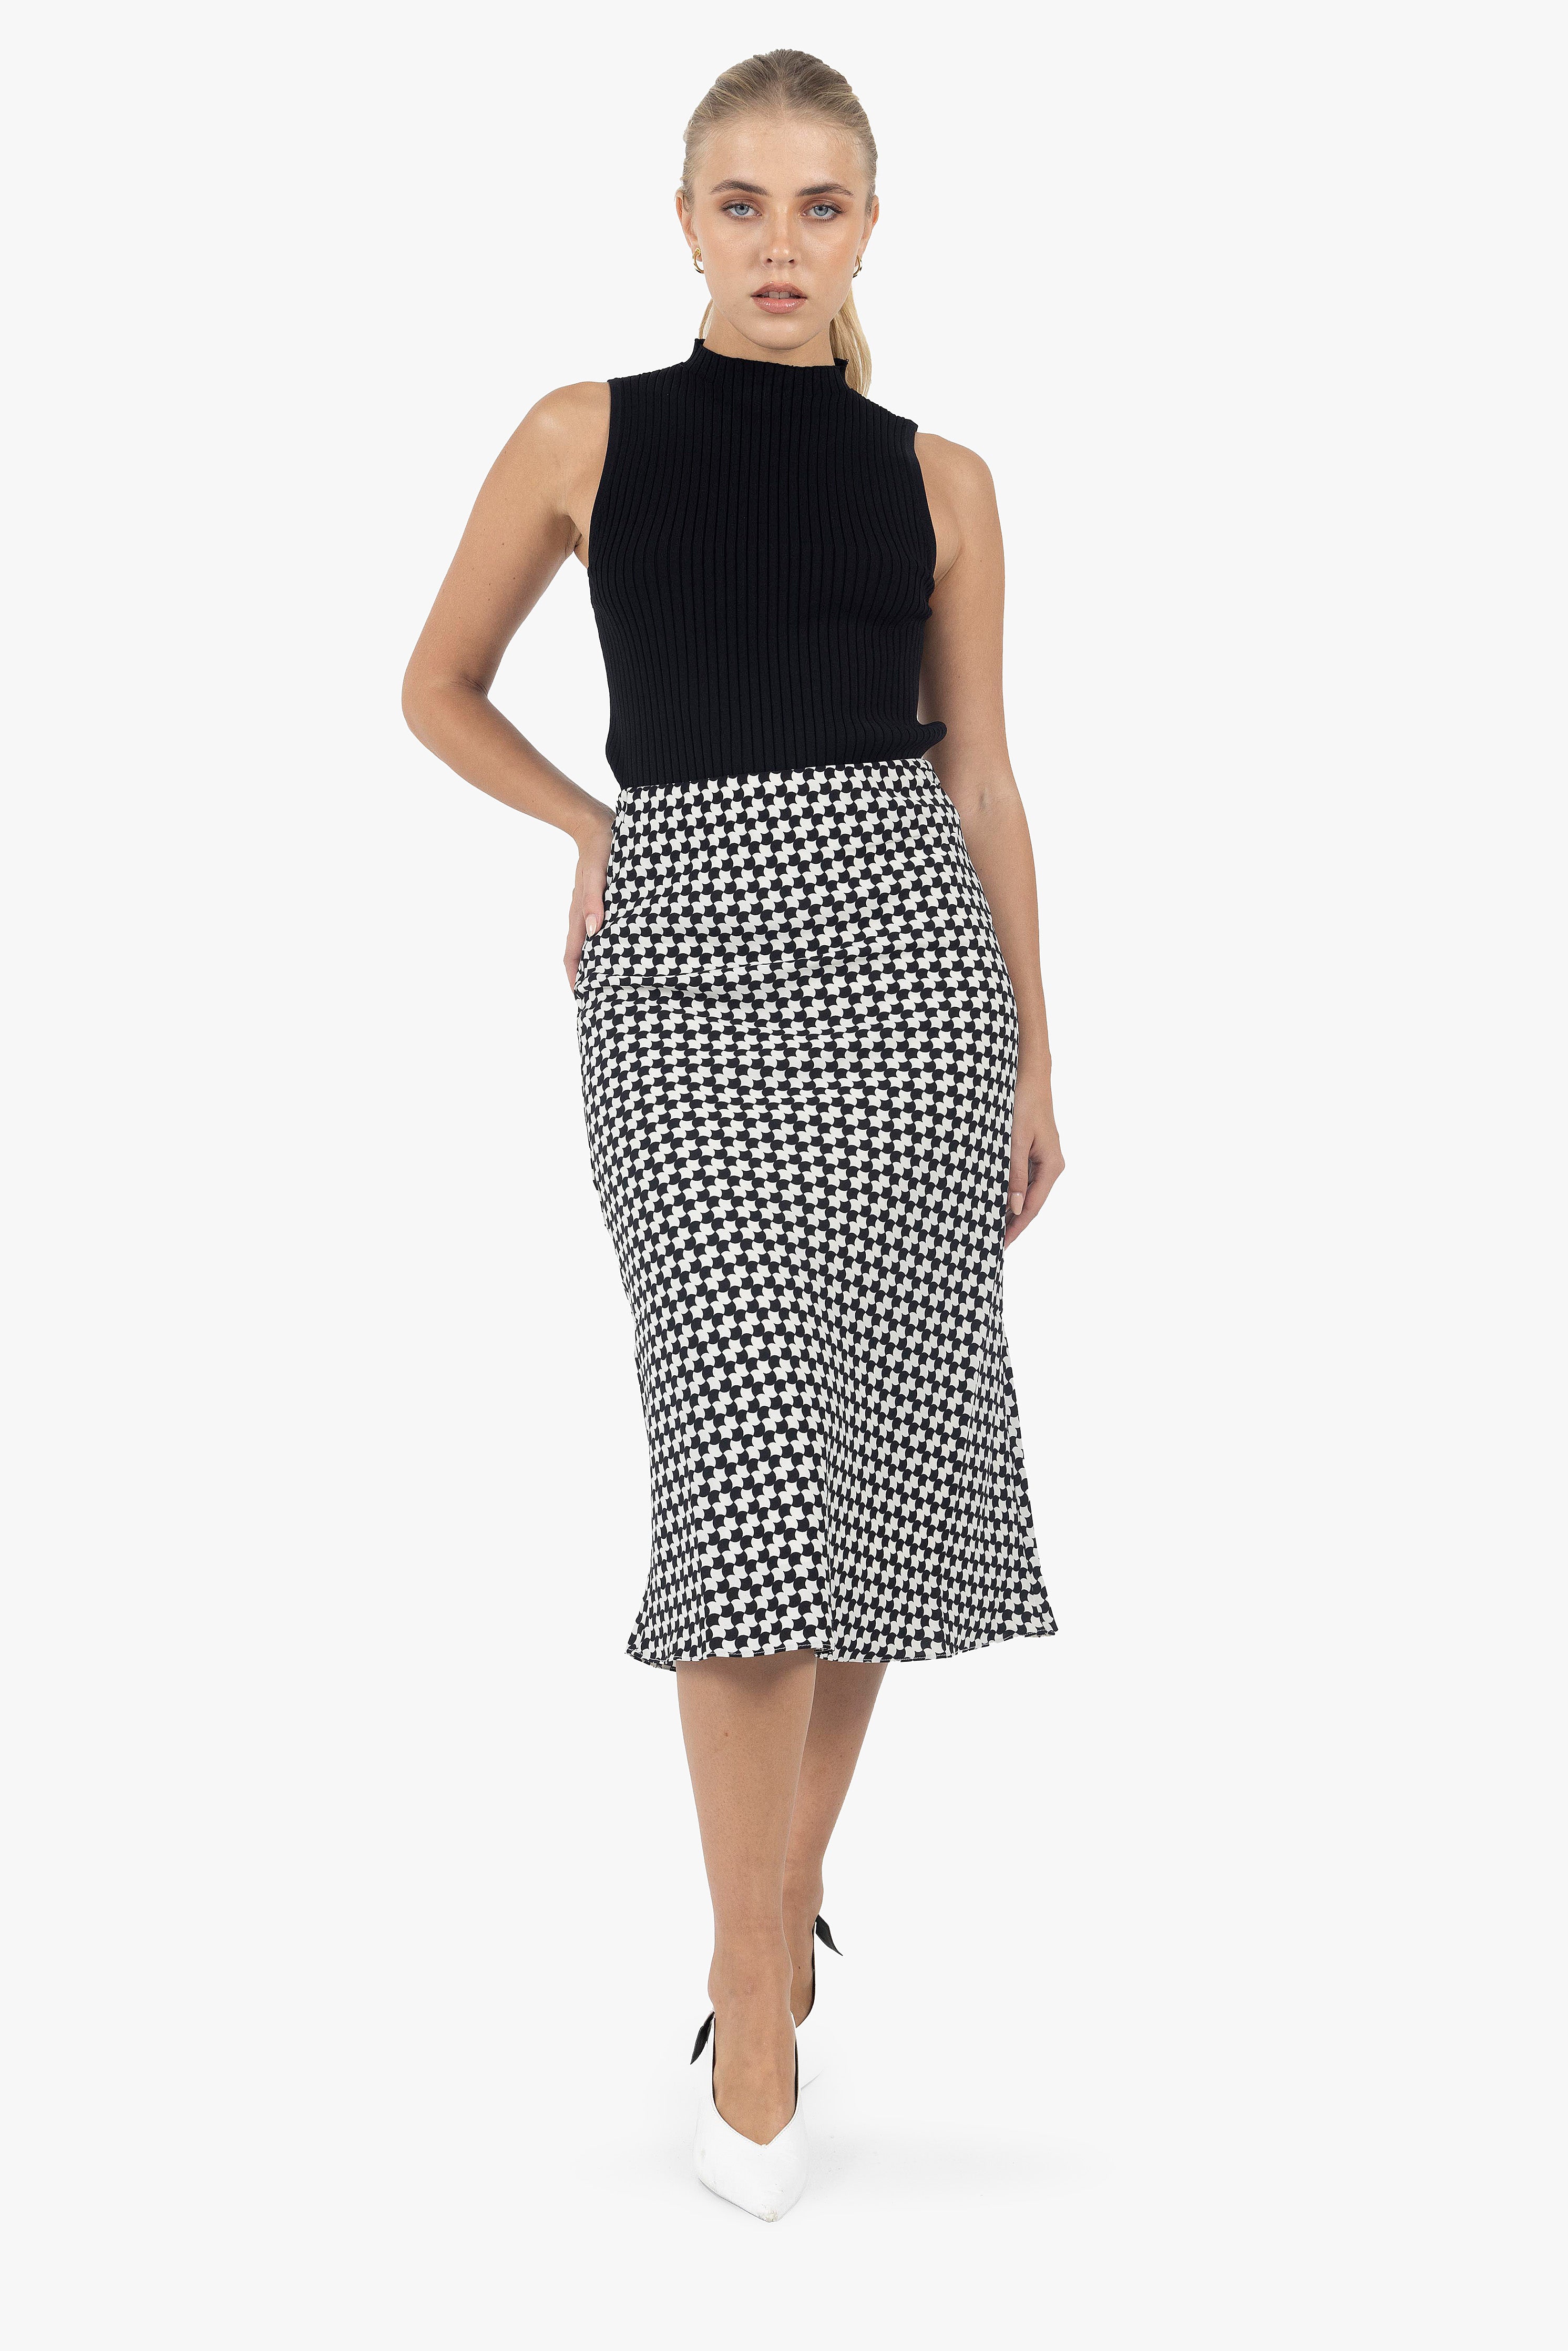 CHIC CONTRAST SKIRT